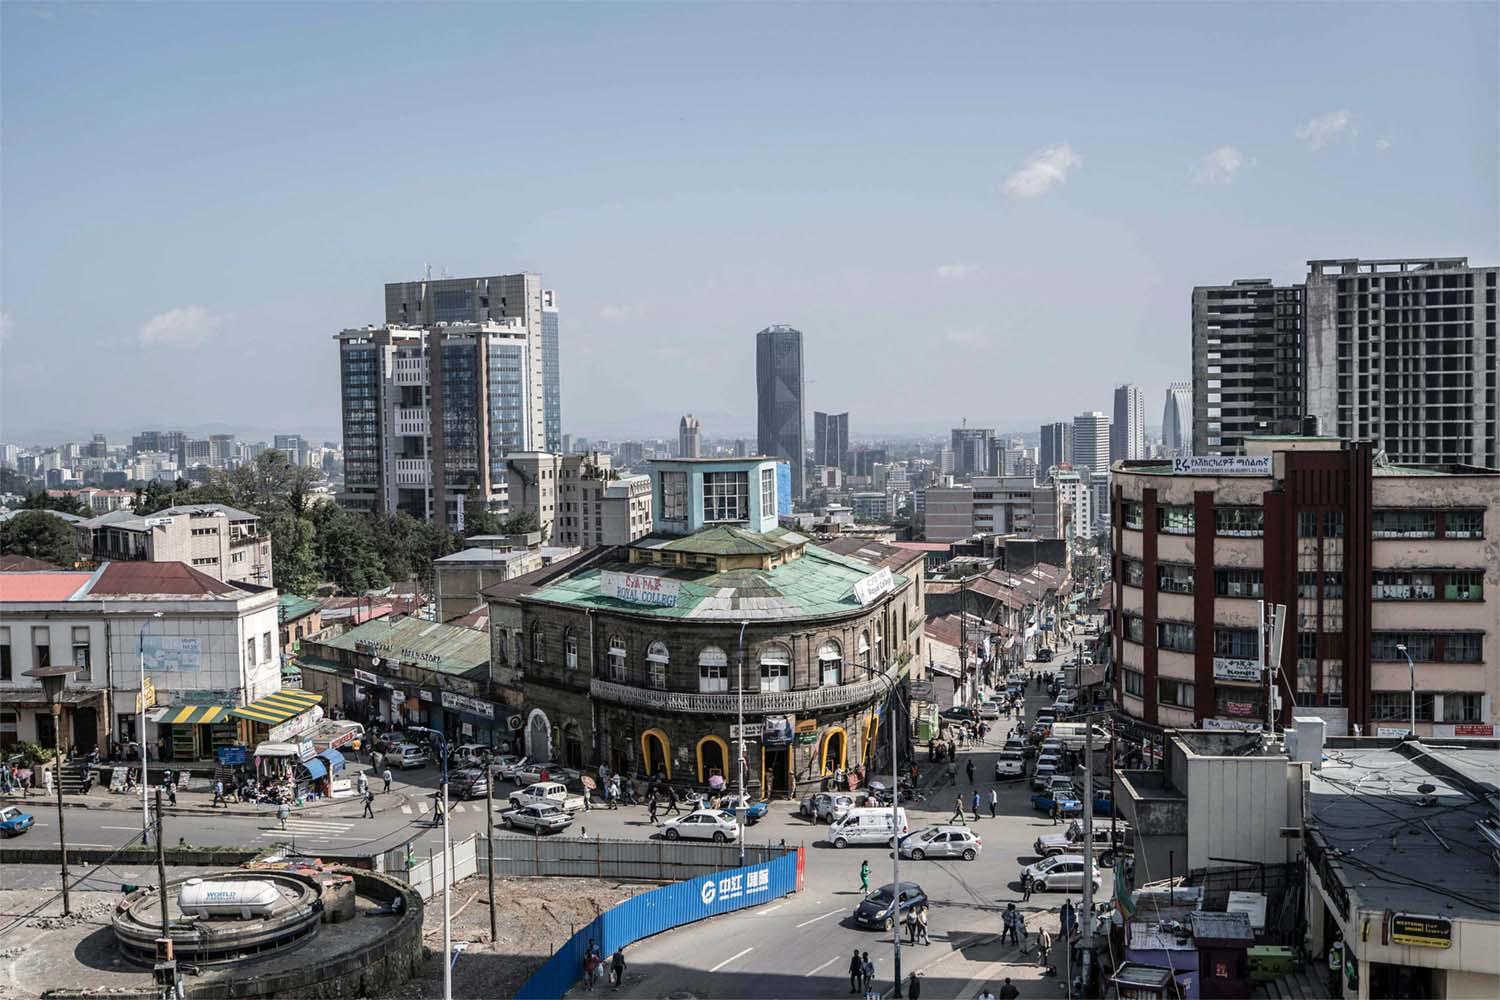 There are currently no investment banks in Ethiopia